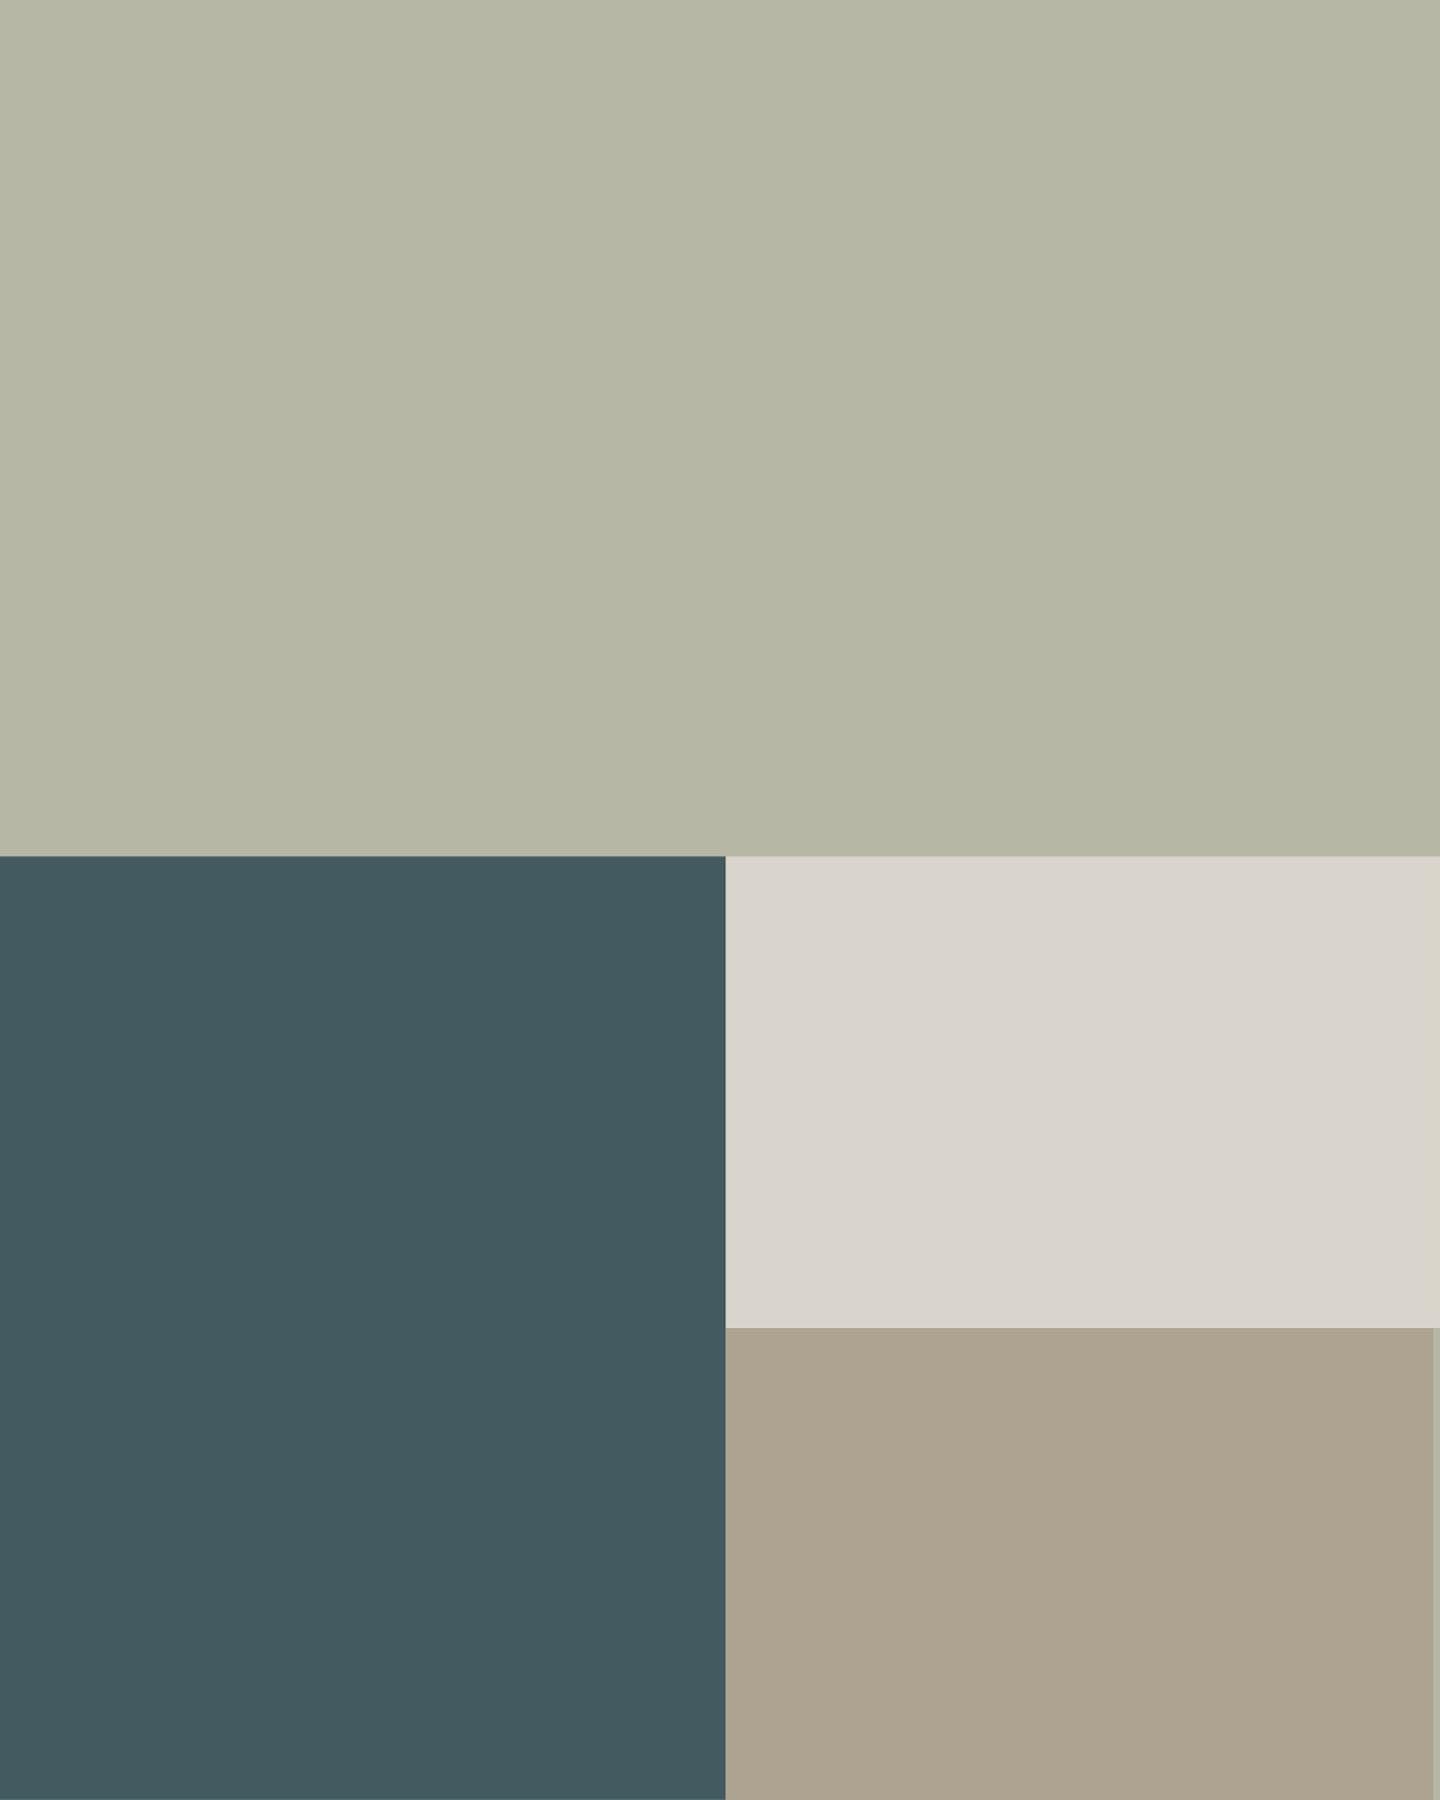 The blending of gentle greens with neutral hues for an understated yet calming effect.

October Mist BM 1495
Balboa Mist BM OC-27
Indian River BM 985
New Providence Navy BM 1651

*Please note that colours may appear differently on screens and in real